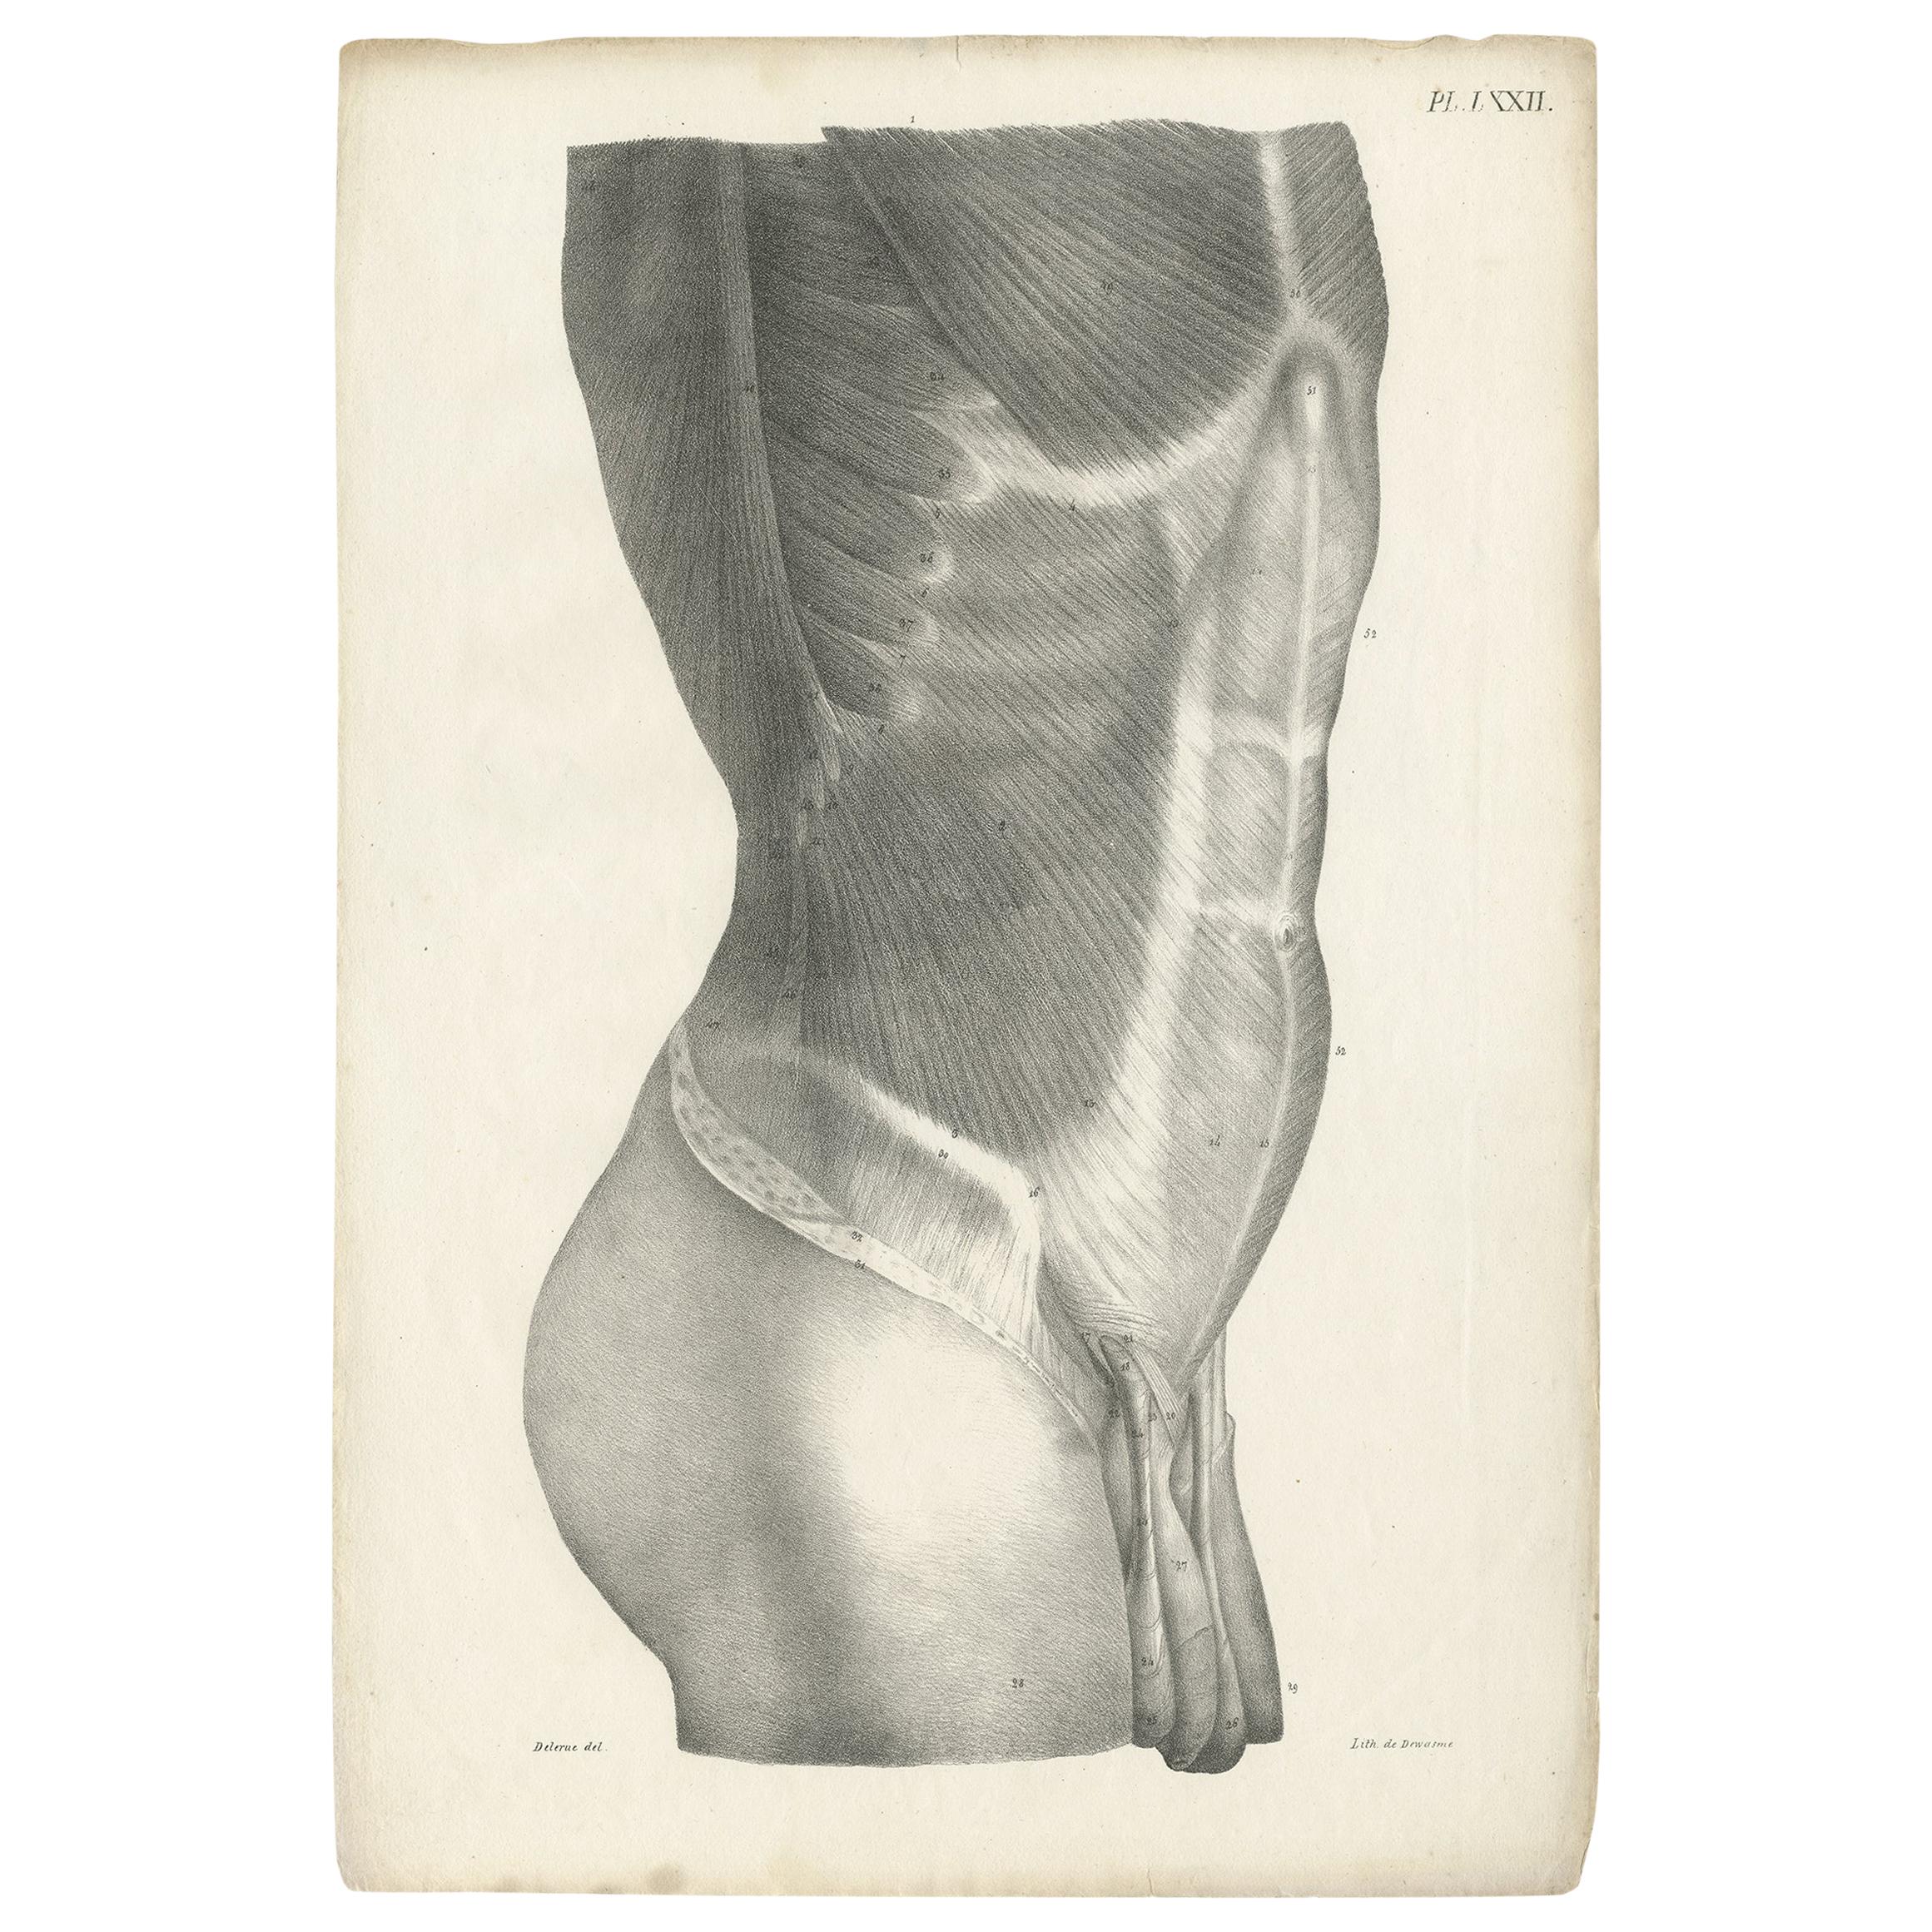 Pl. LXXII Antique Anatomy / Medical Print of the Male Torso by Cloquet '1821' For Sale